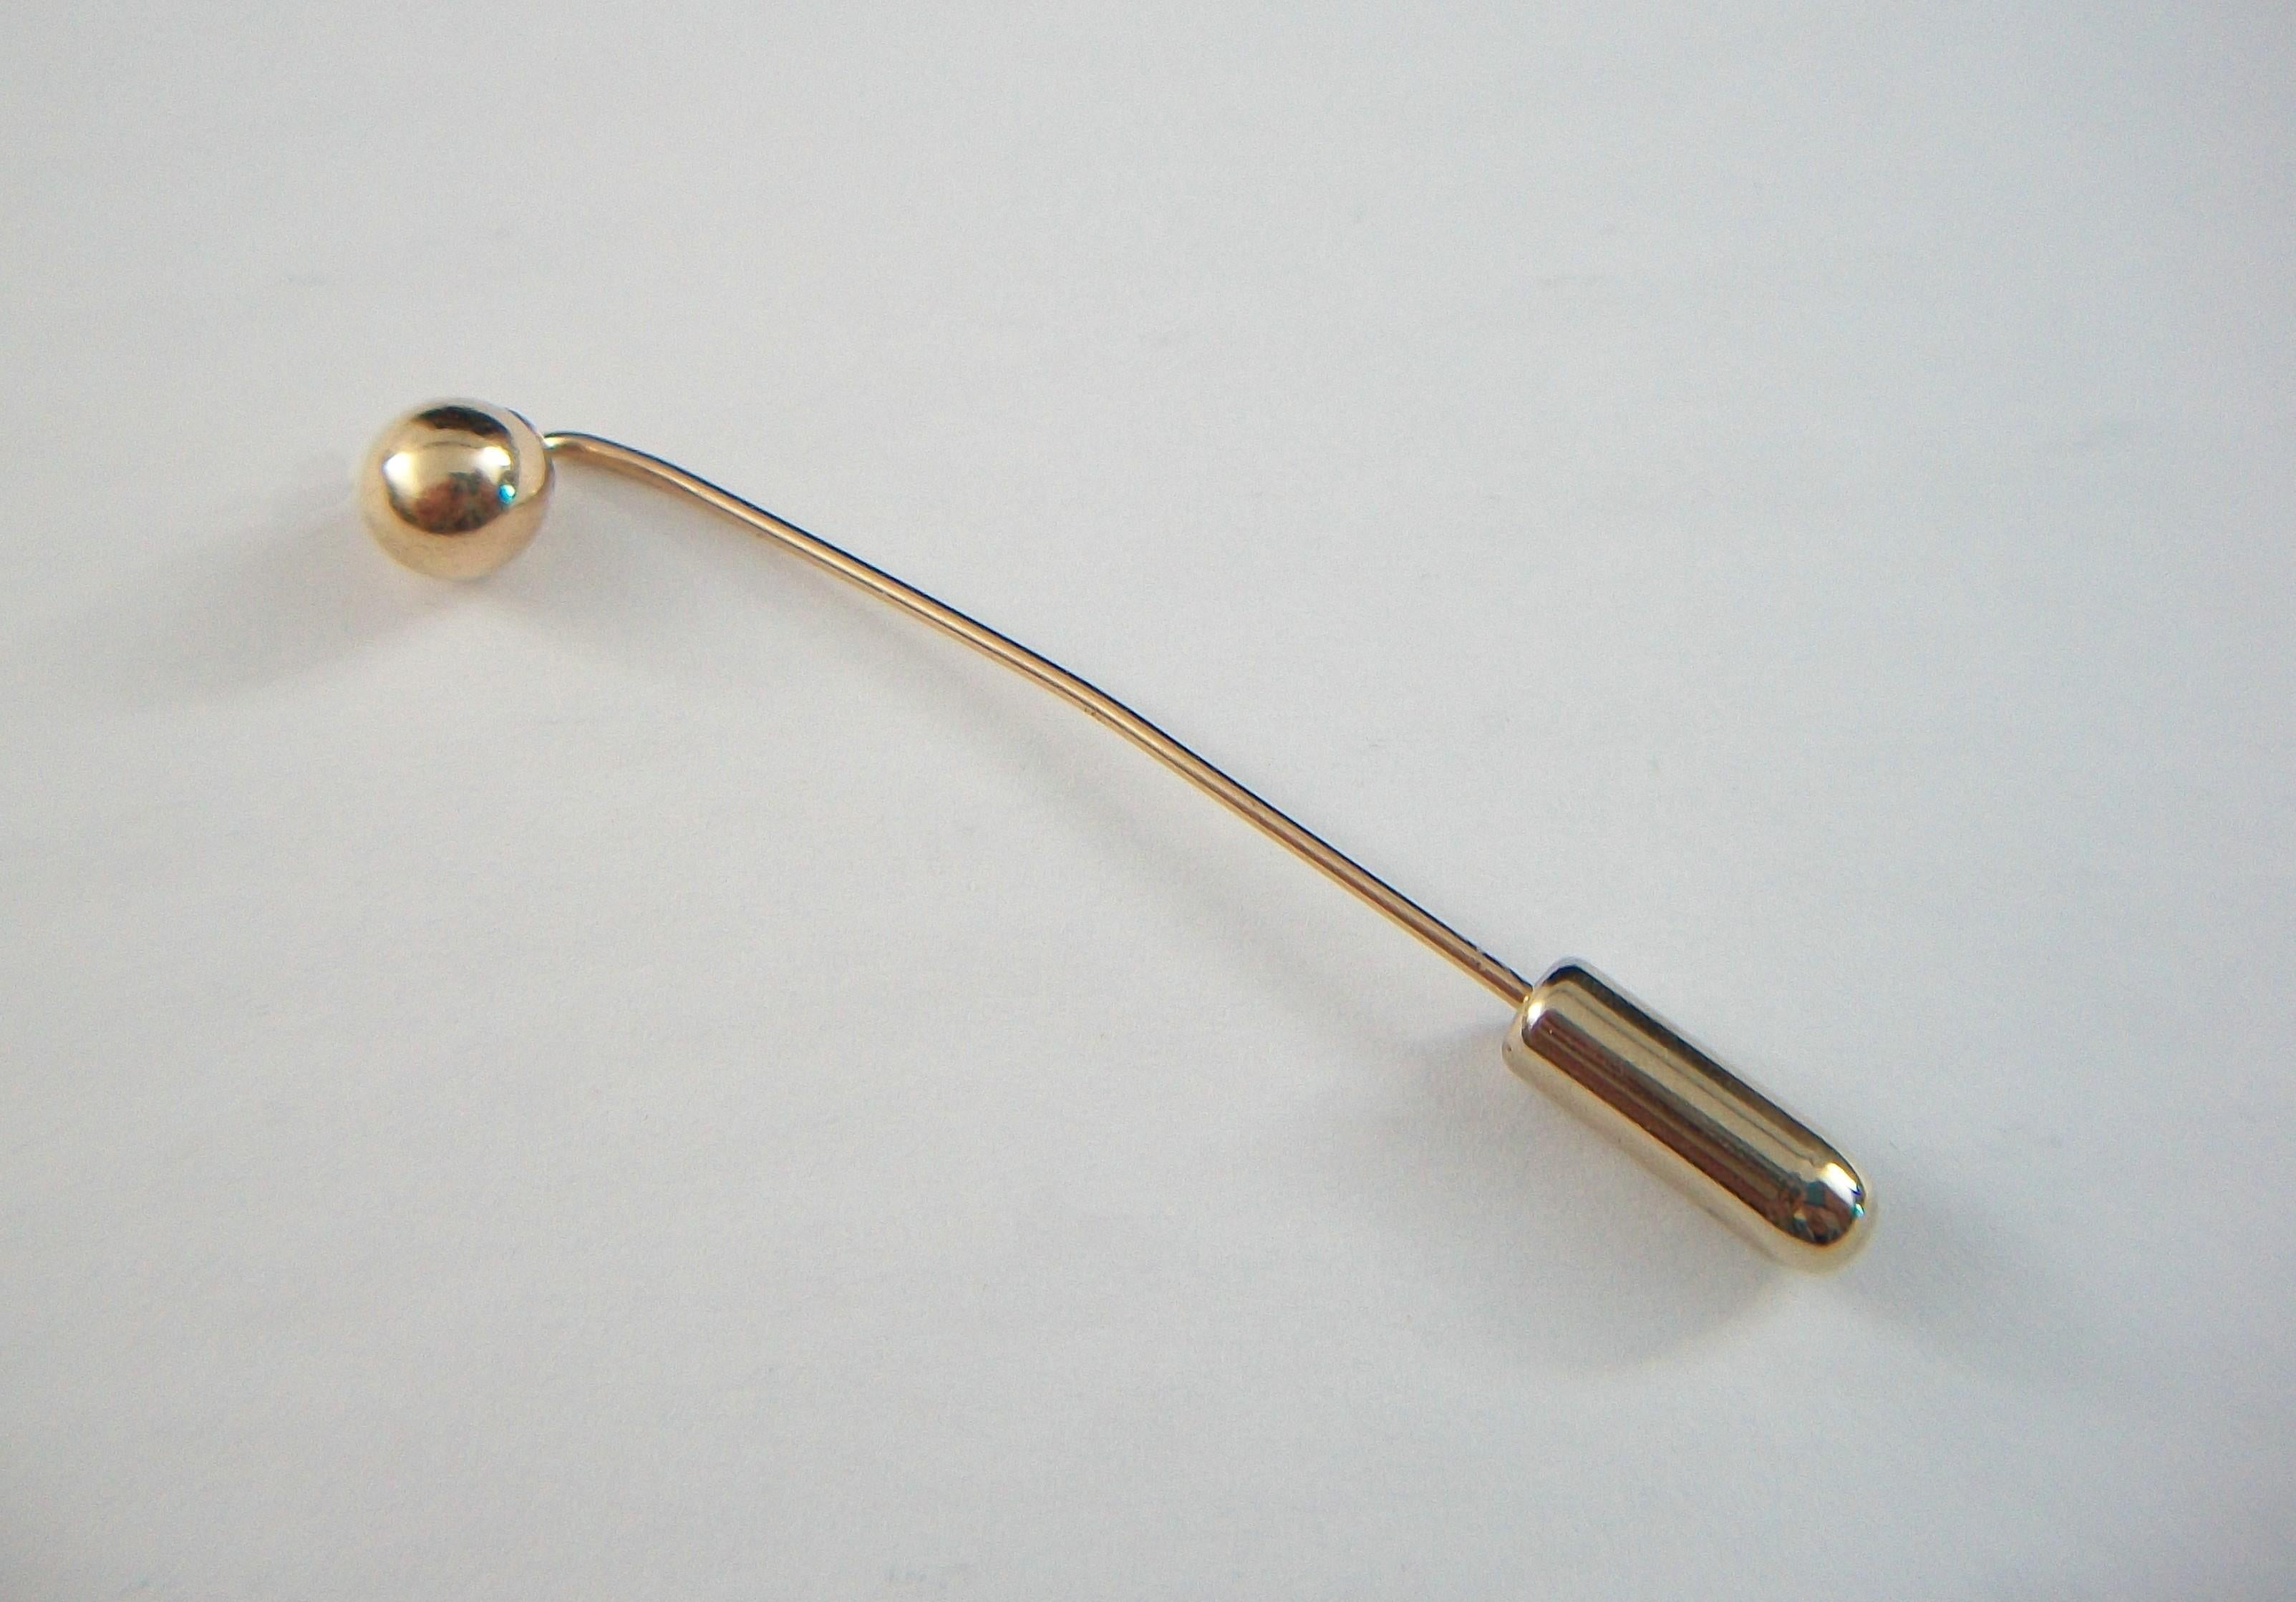 Vintage 10K yellow gold ball stick pin - featuring a gold sphere (6 mm. diameter) - hand made - stamped 10K on the pin - indistinct maker's mark (unknown/unidentified) - United States (likely) - circa 1980's.

Excellent vintage condition - all